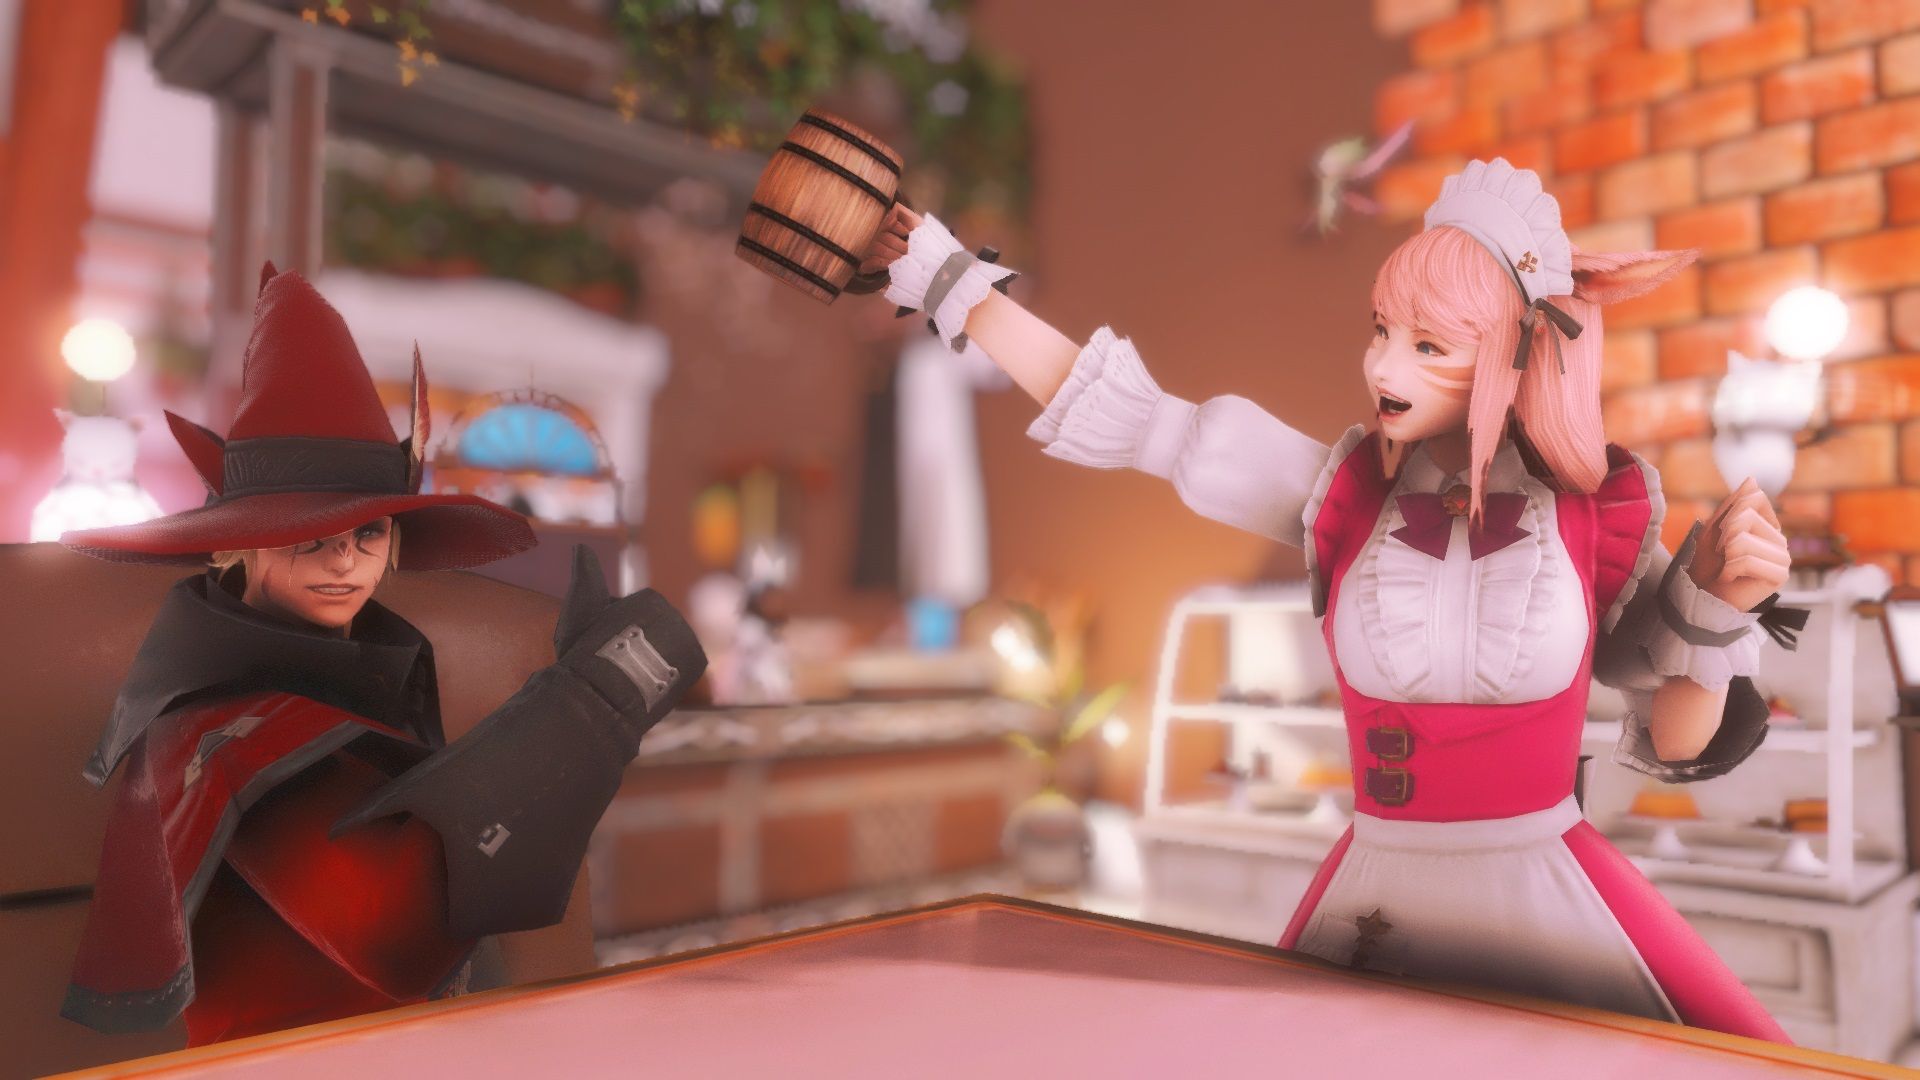 Final Fantasy 14 a maid having a drink with a customer in the Maid Service cafe